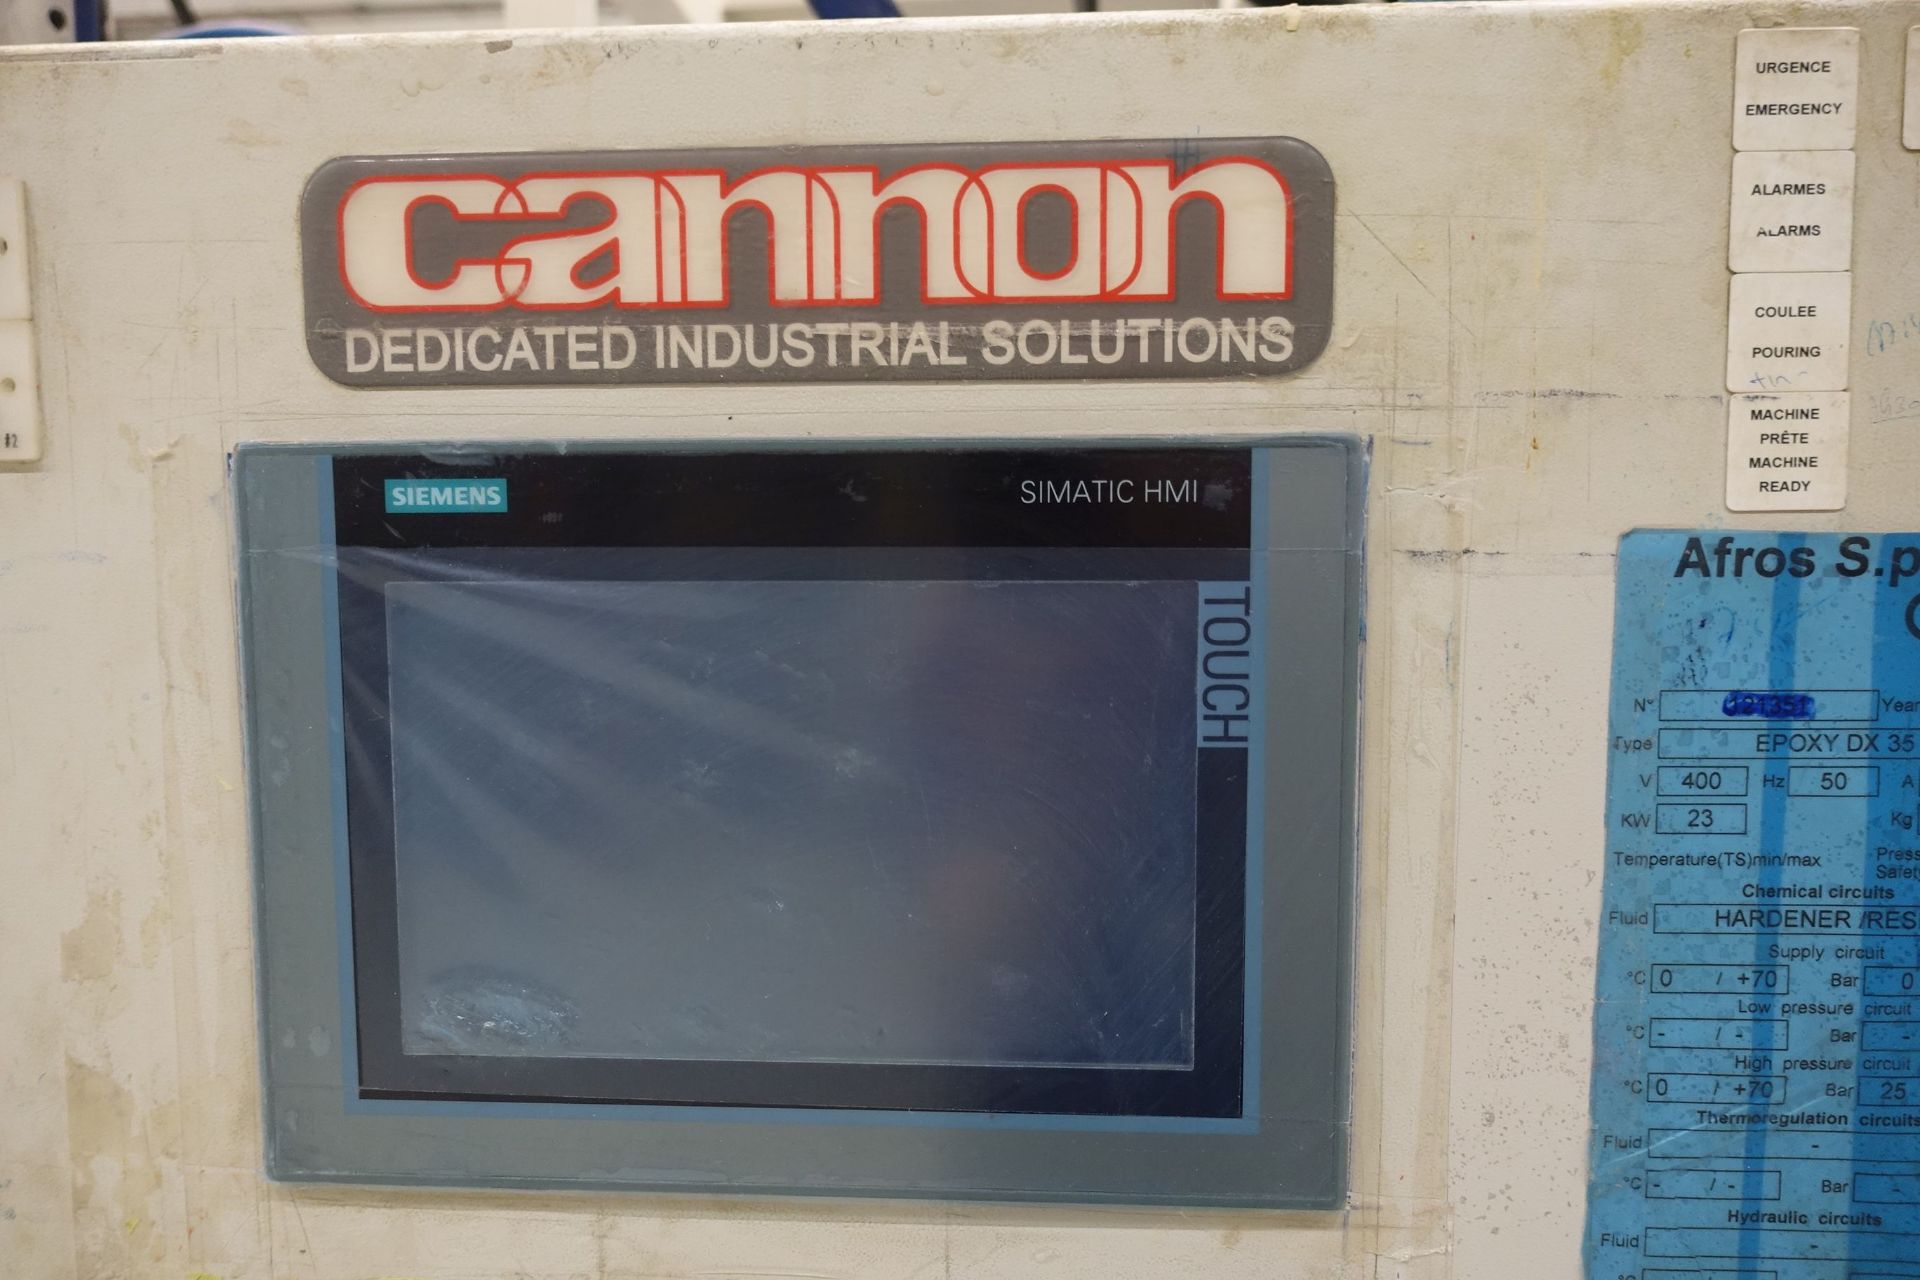 Cannon EPOXY DX35 Low Pressure Epoxy Resin Infusion System for Epoxy Resin Infusion Process, with - Image 7 of 20